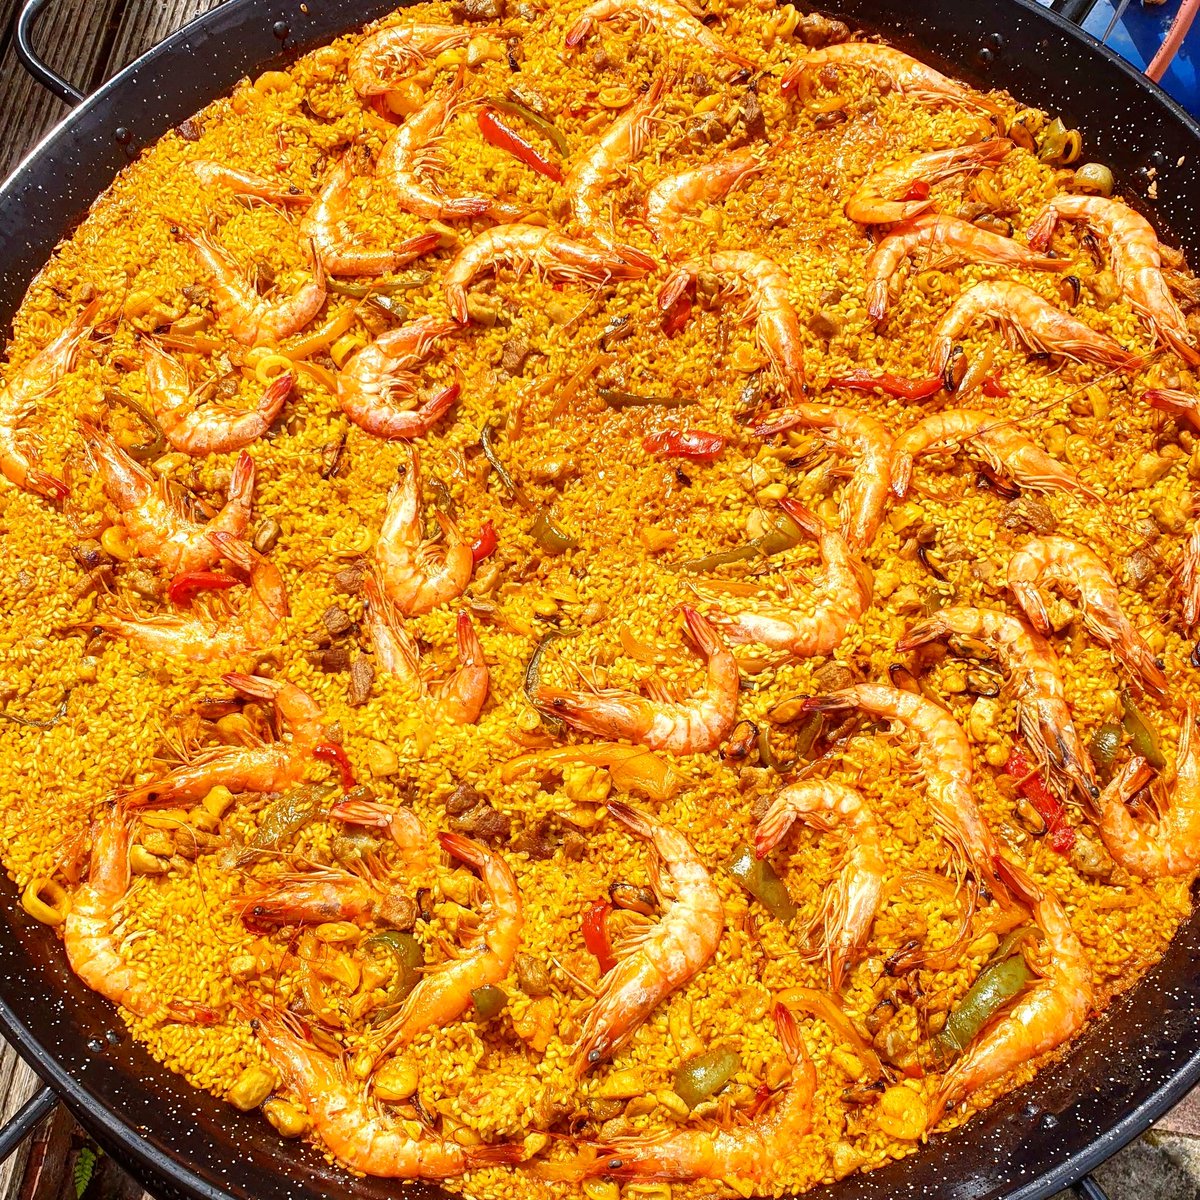 Do you like Paella? What is your favourite ingredient?
It's  so difficult to decide but we love mix between meat and seafood. What about you?
#paella #seafoodrice #gastrospain #spanishgastronomy